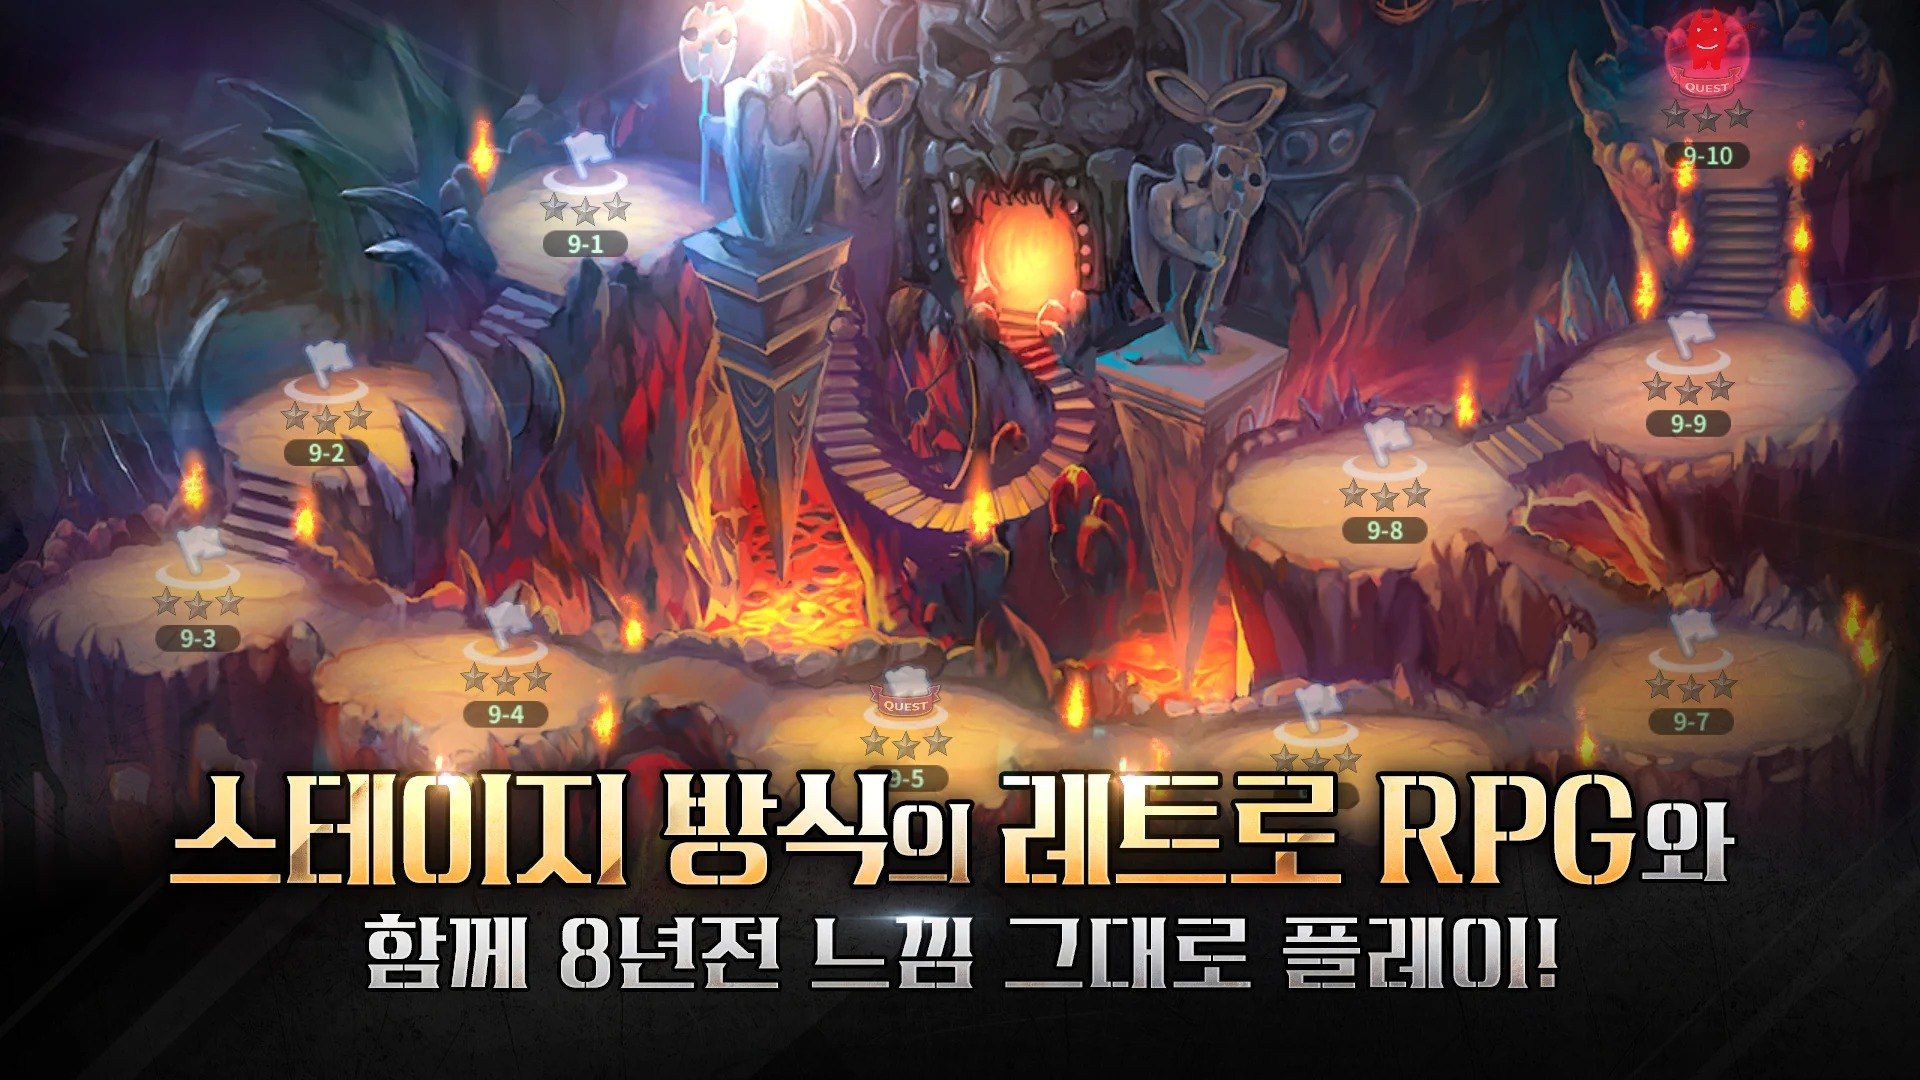 Ragnarok 20 Heroes is now available for Pre-Registrations for Android and iOS in South Korea